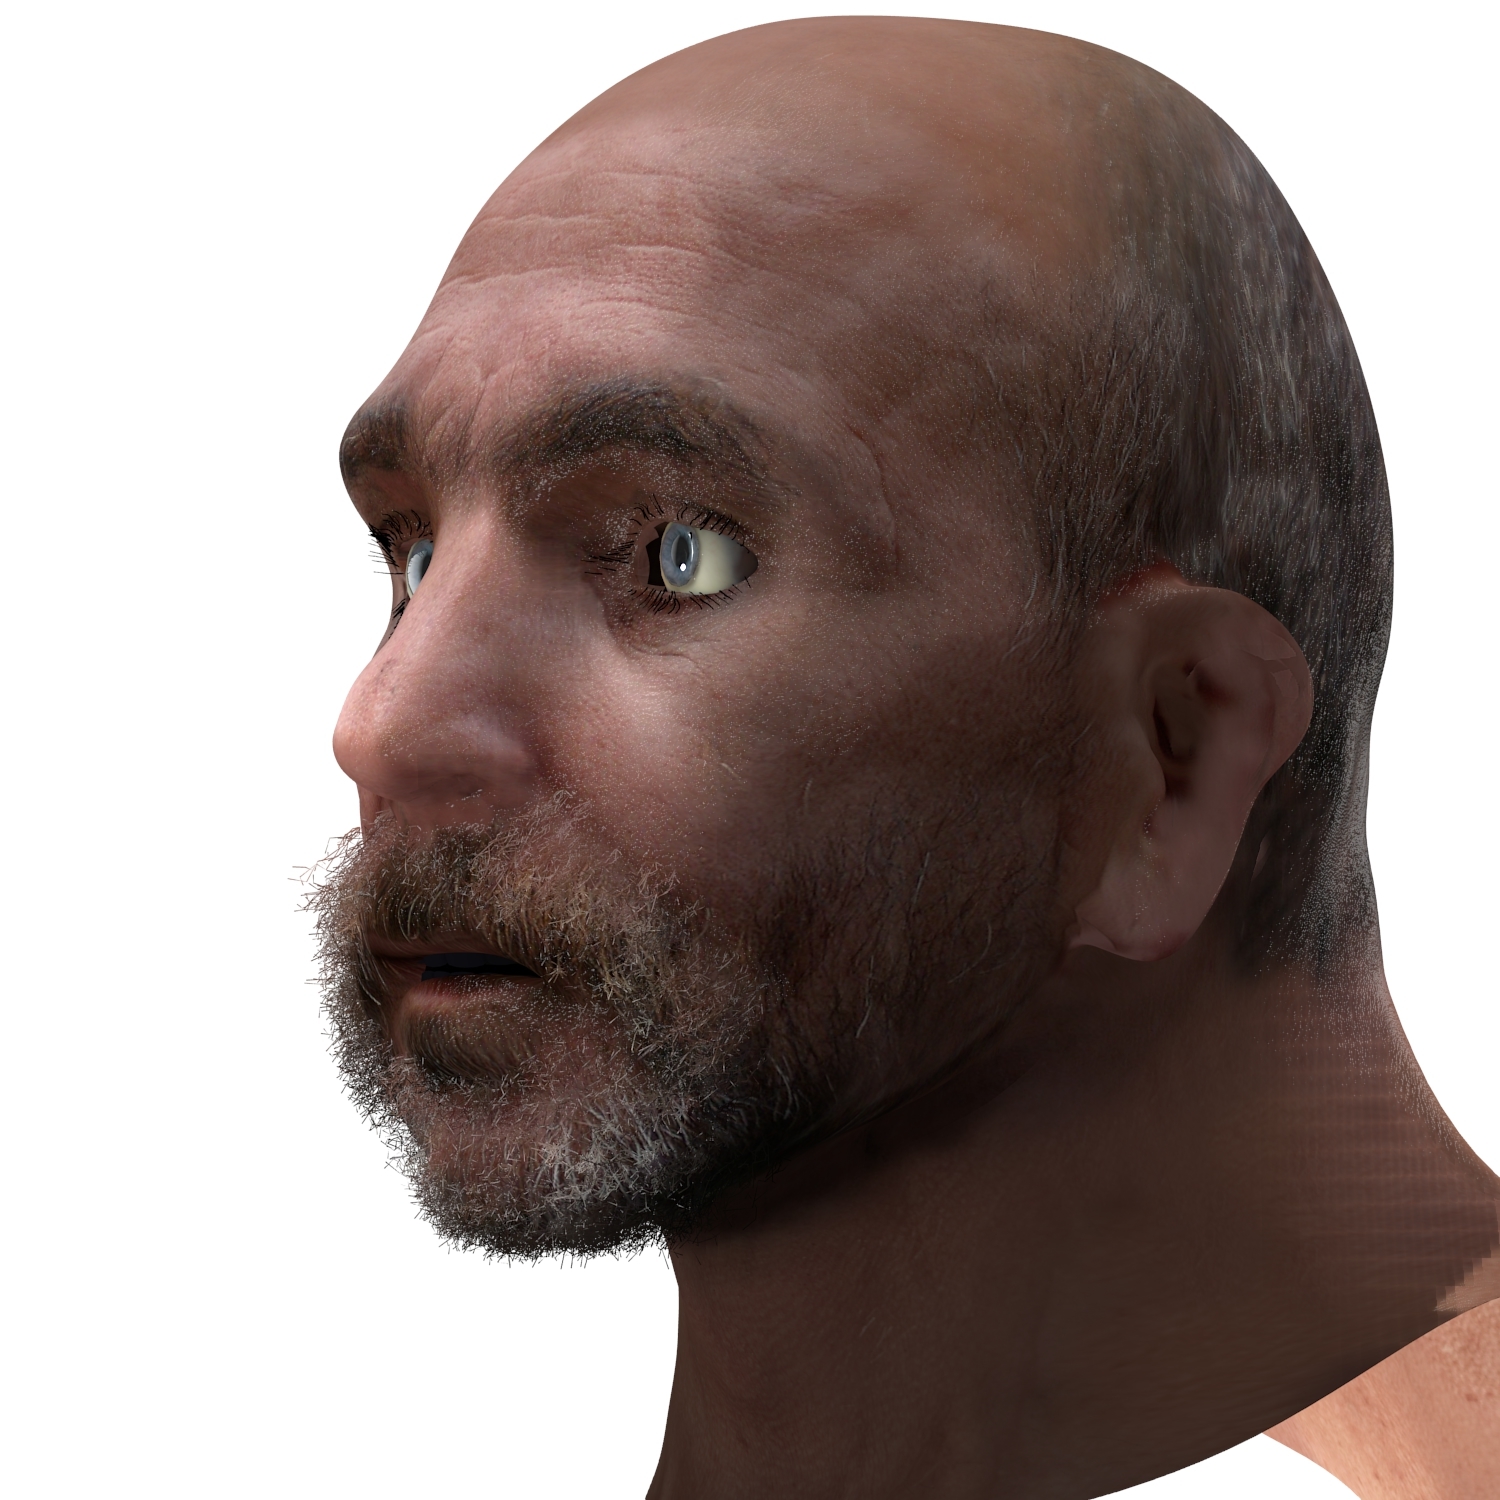 blend rigged male head